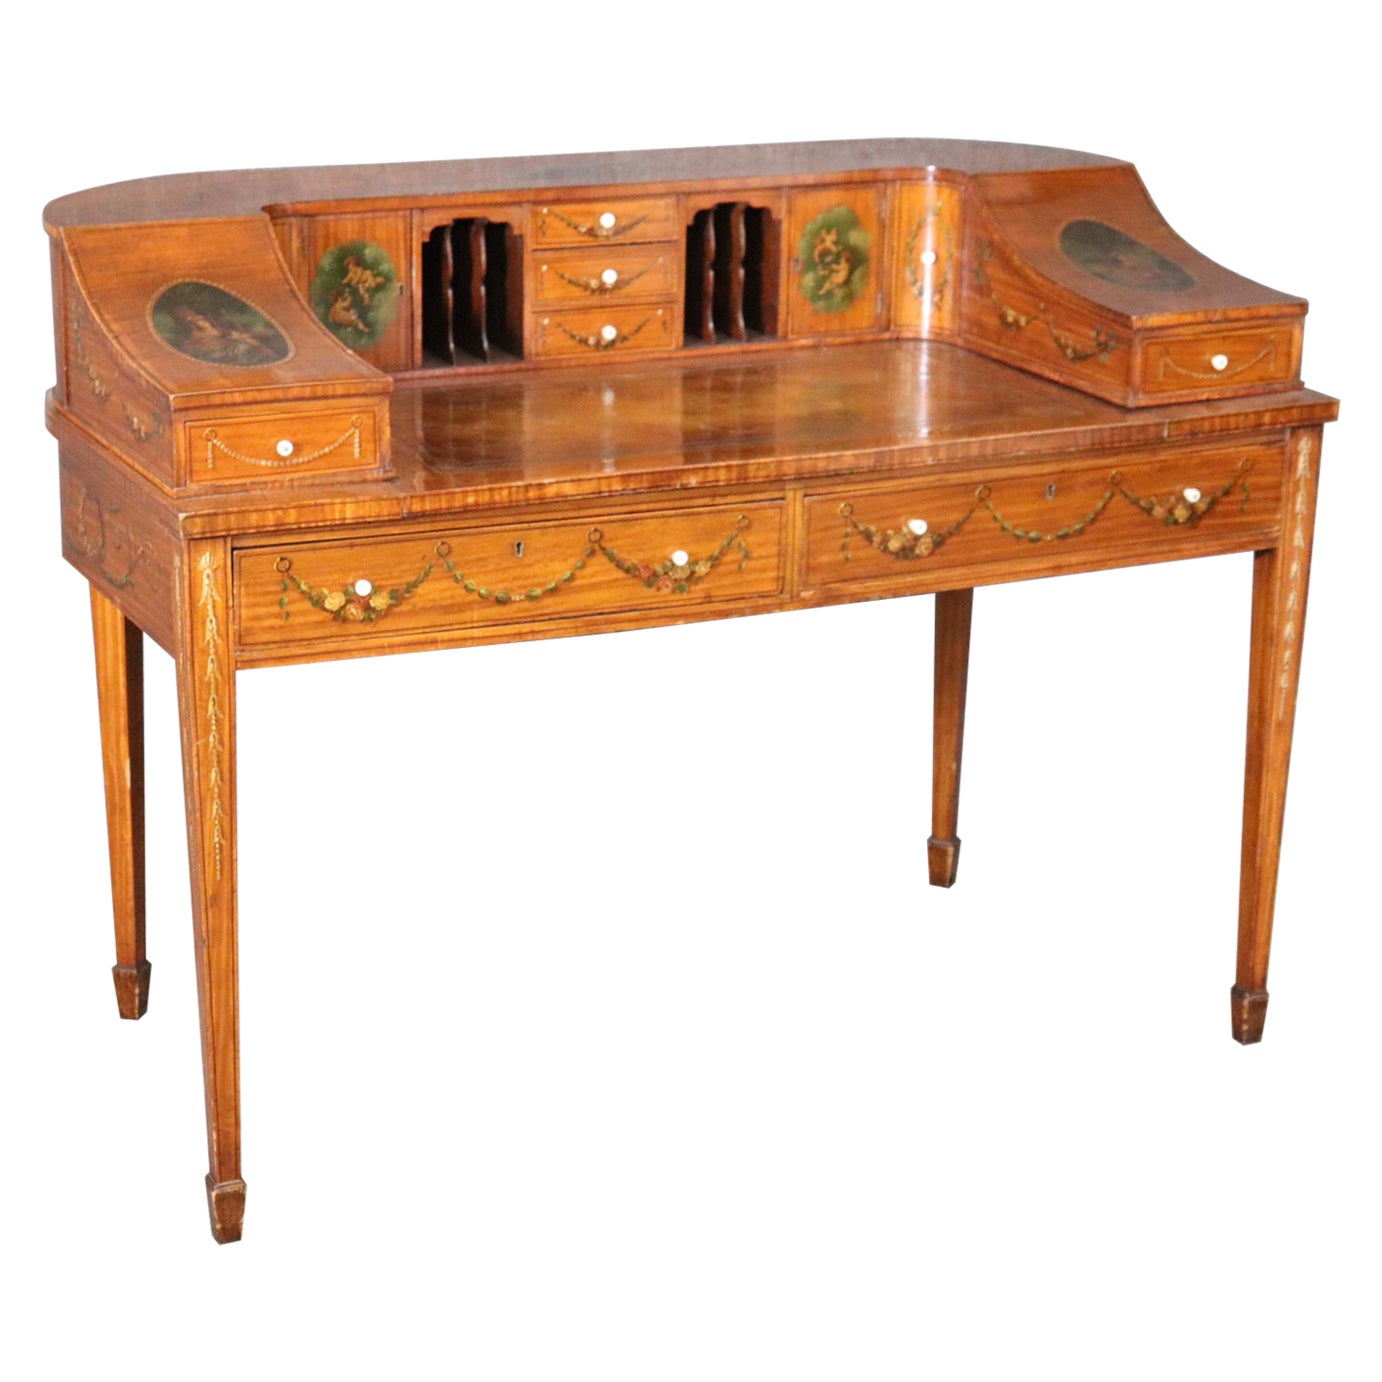 Fine Quality English Satinwood Carlton House Desk with Cherubs and Musical Theme